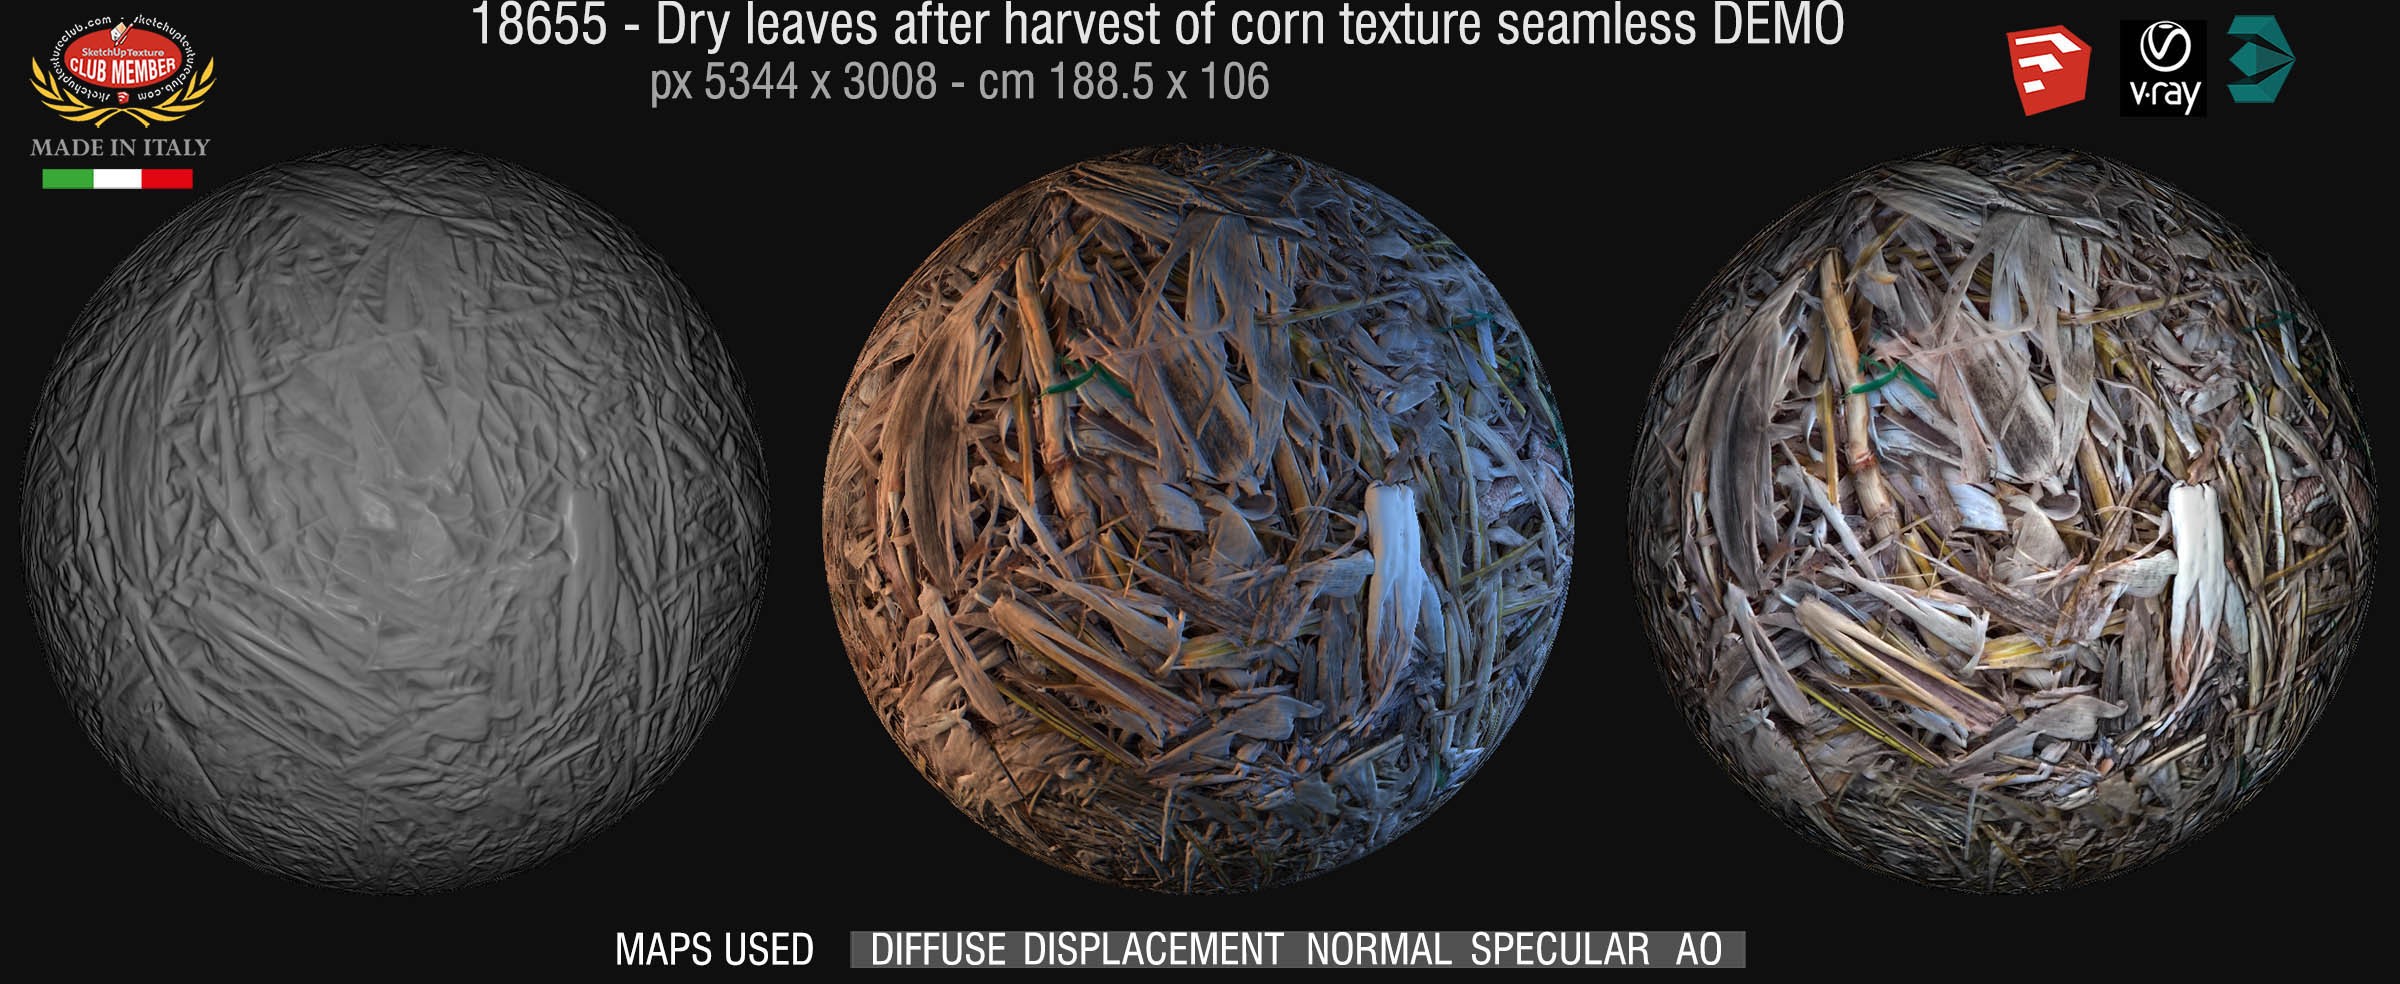 18655 Dry leaves after harvest of corn texture seamless + maps DEMO